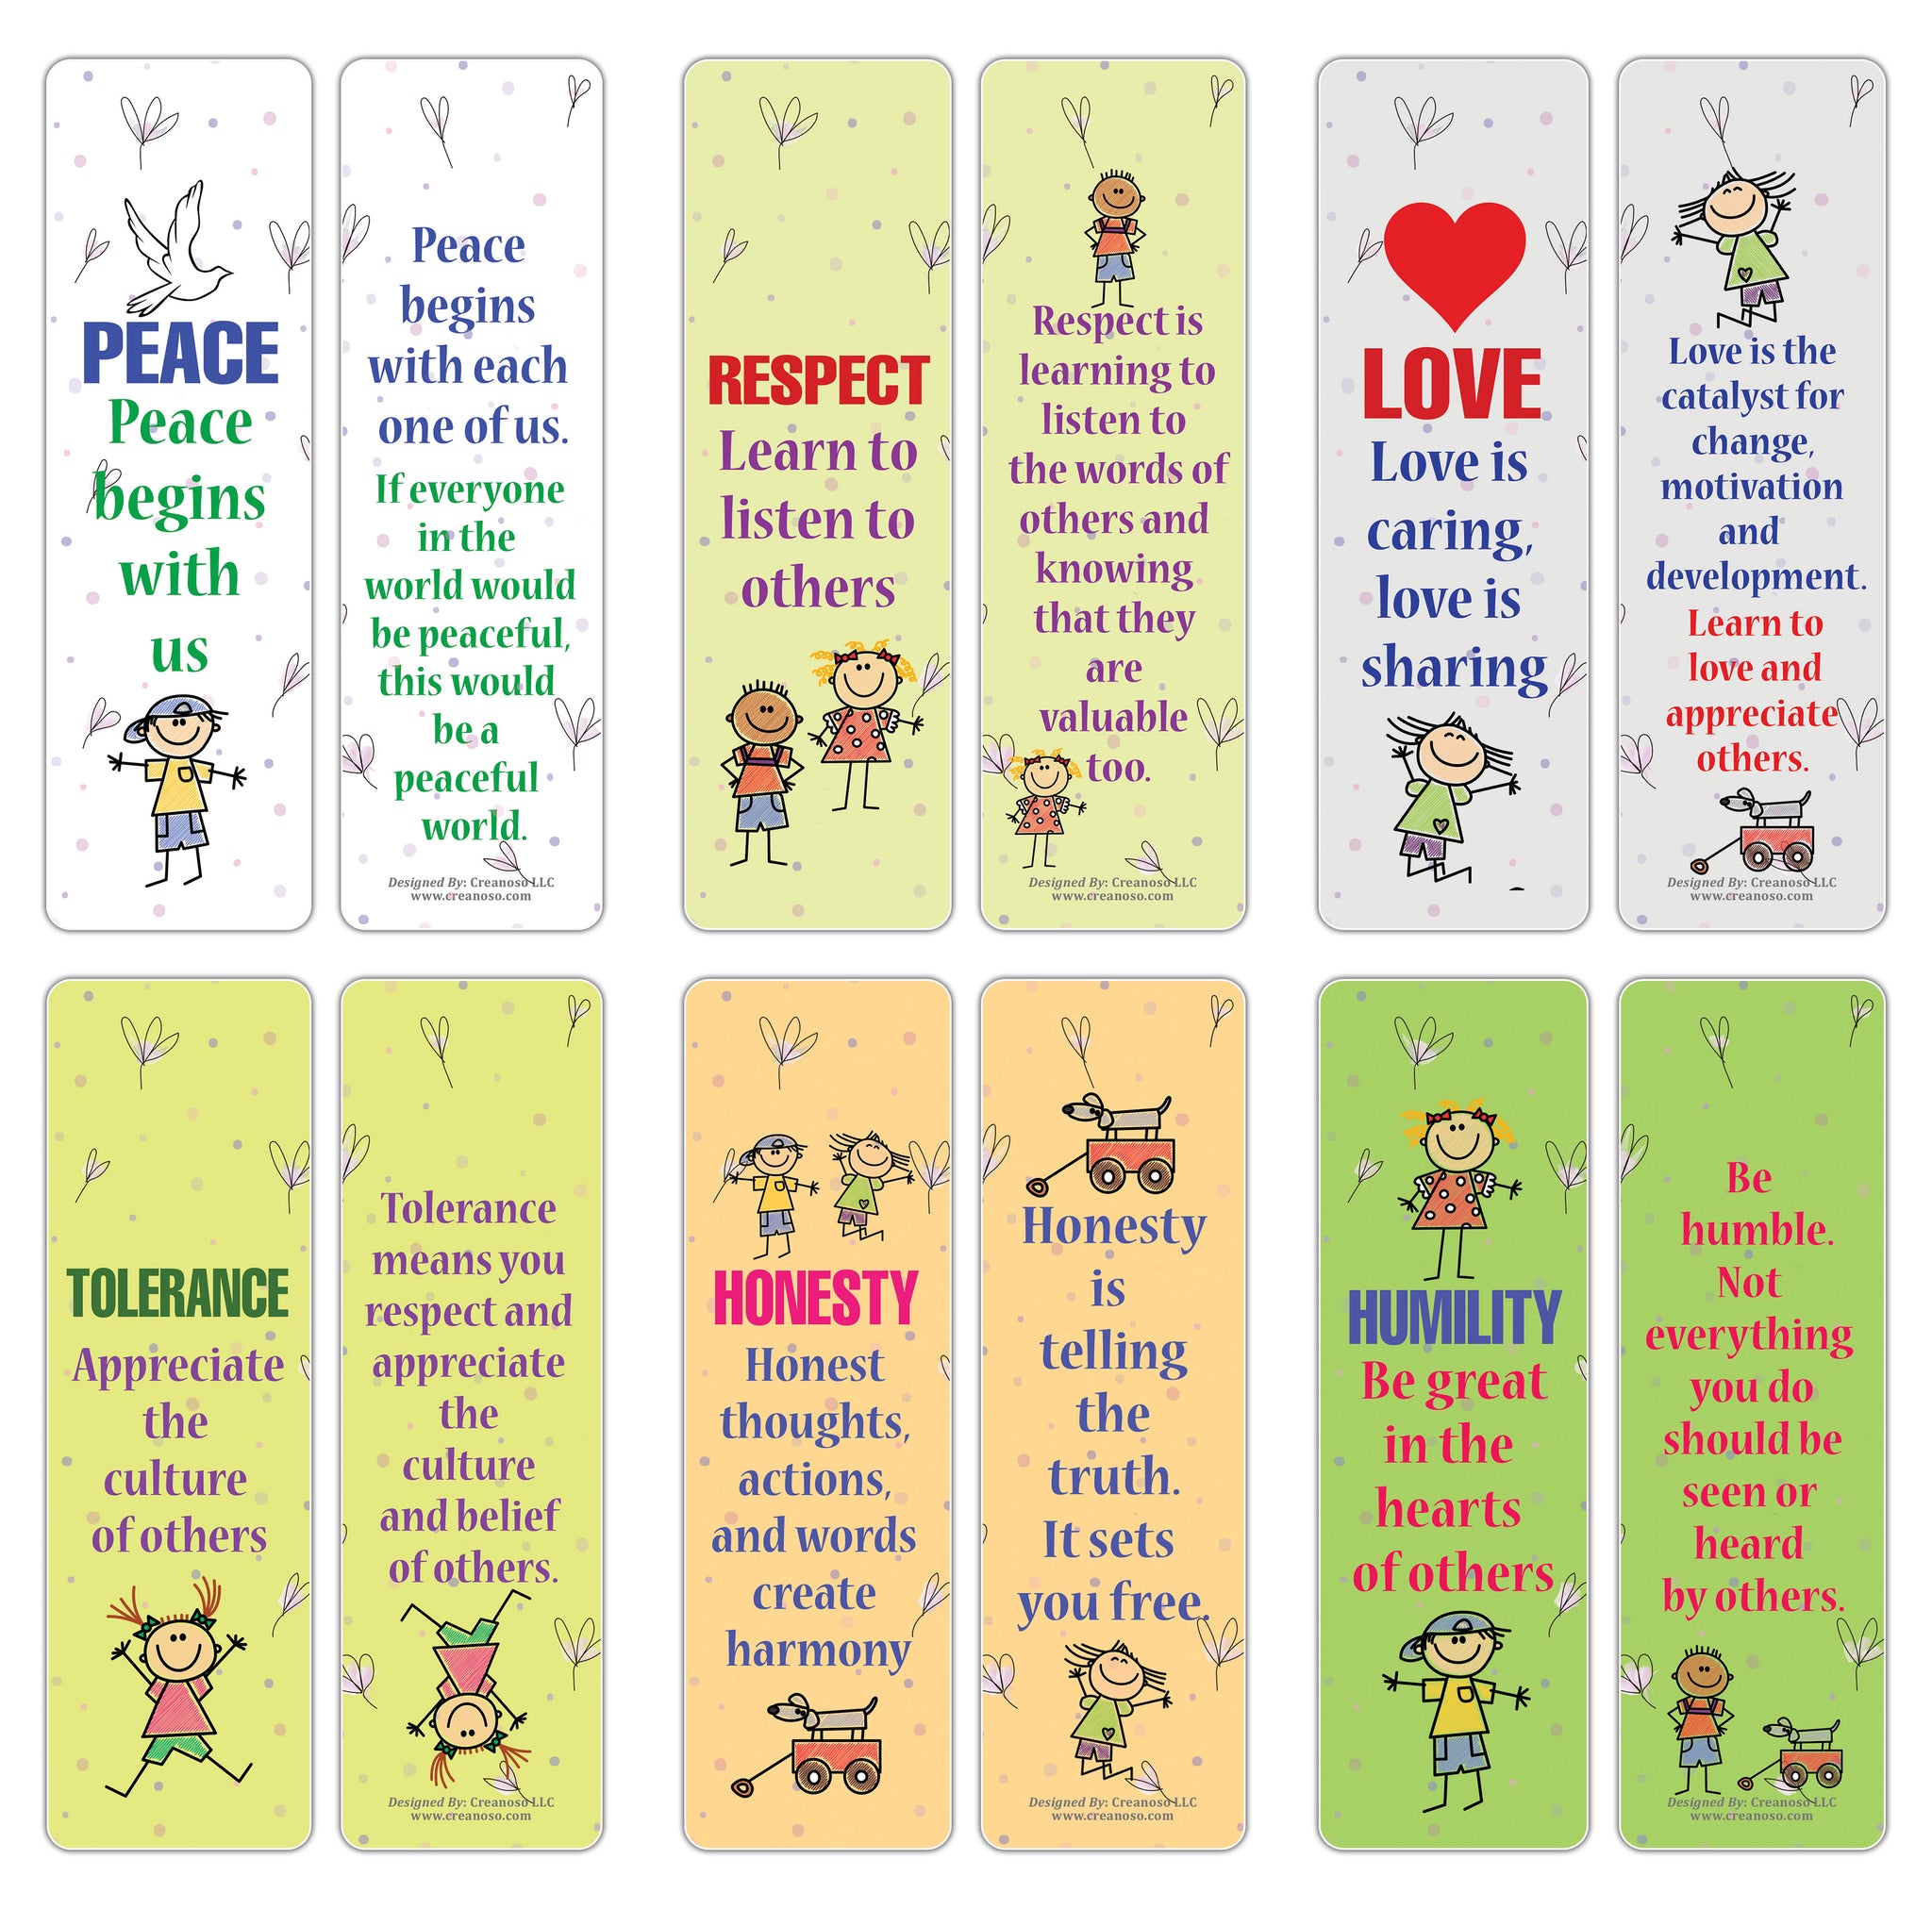 Creanoso Good Values Bookmarks for Kids Series 1 (12-Pack) â€“ Premium Gifts Bookmarks for Young Bookworm â€“ Stocking Stuffers for Boys Girls Teens Children â€“ Home Office Supplies â€“ DIY Kit